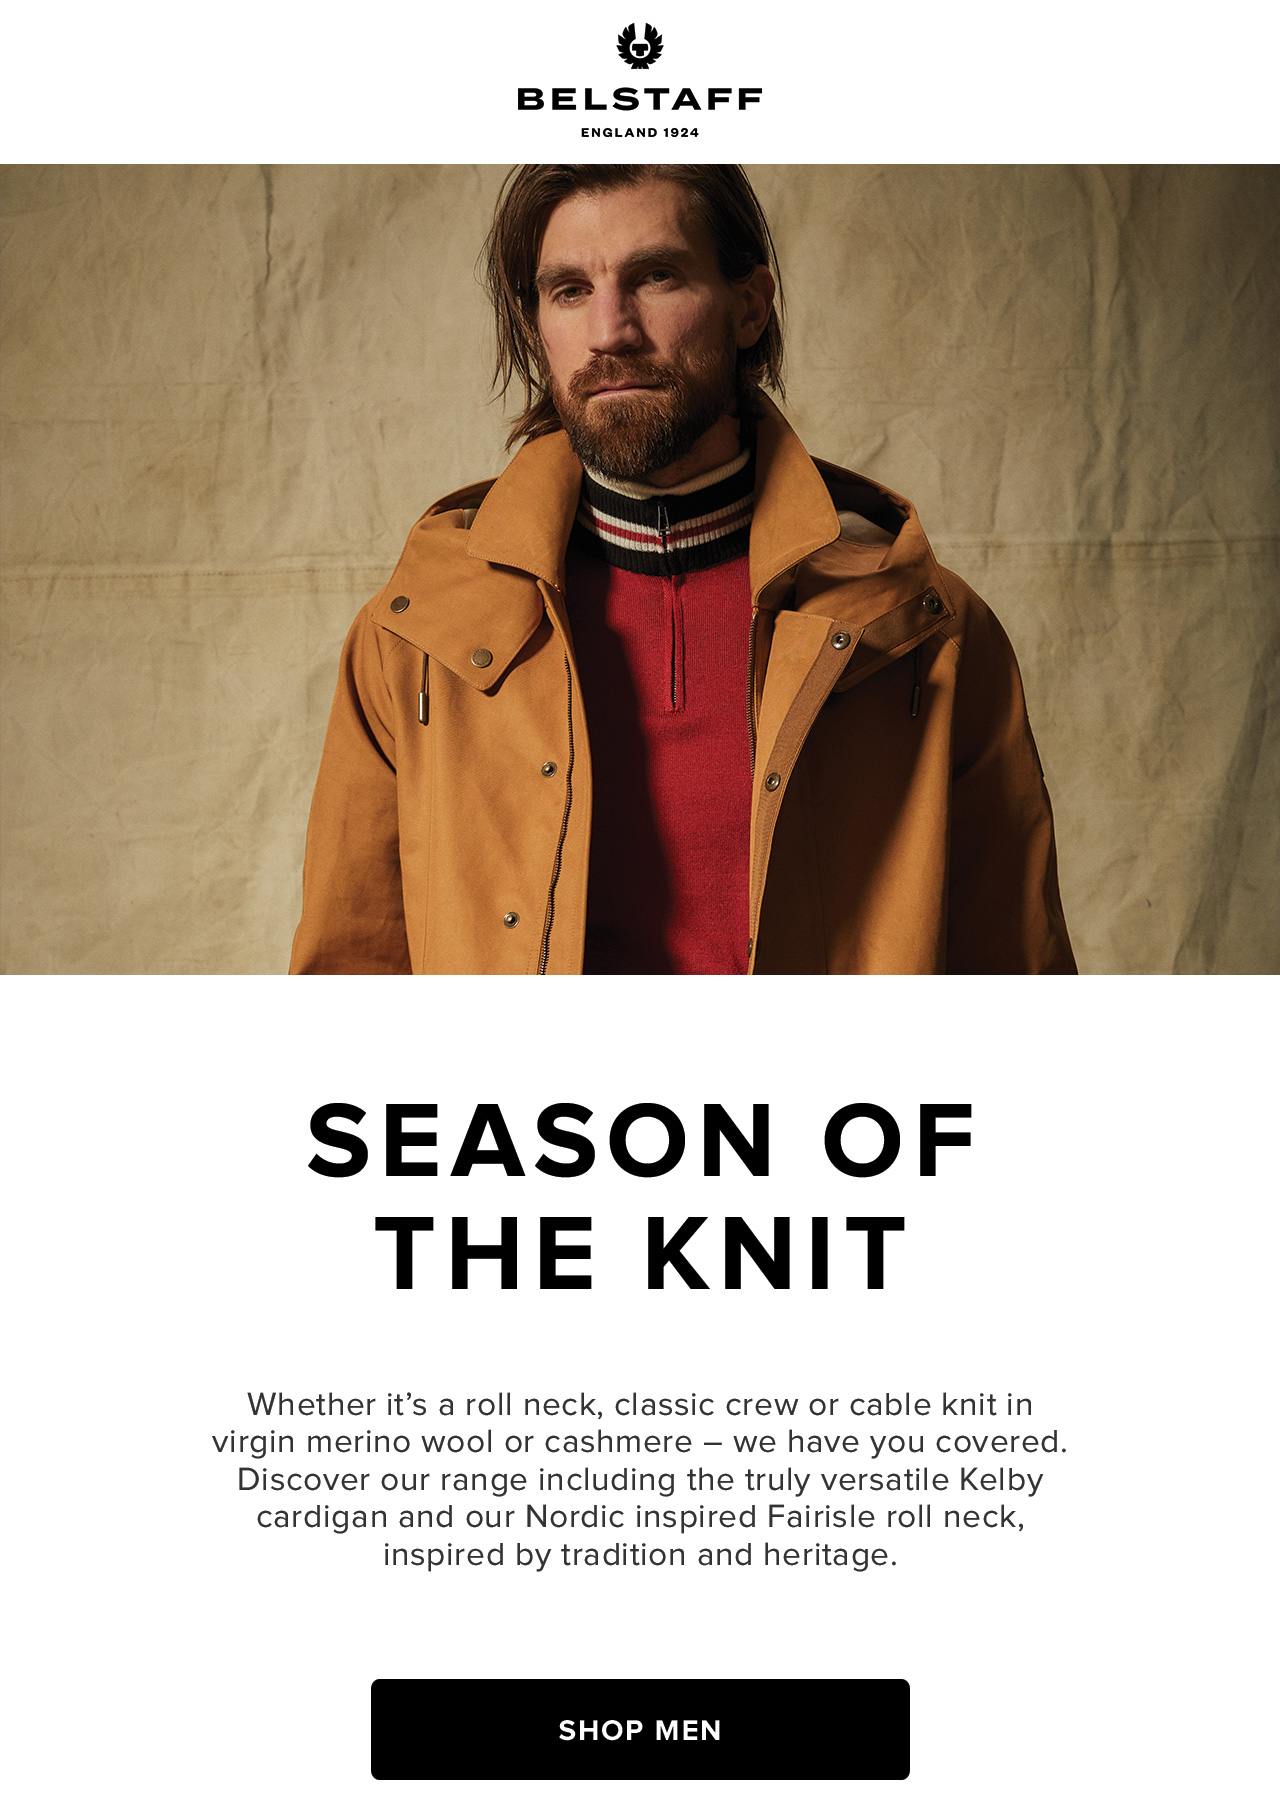 Whether it's a roll neck, classic crew or cable knit in virgin merino wool or cashmere - we have you covered. Discover our range including the truly versatile Kelby cardigan and our Nordic inspired Fairisle roll neck, inspired by tradition and heritage. 